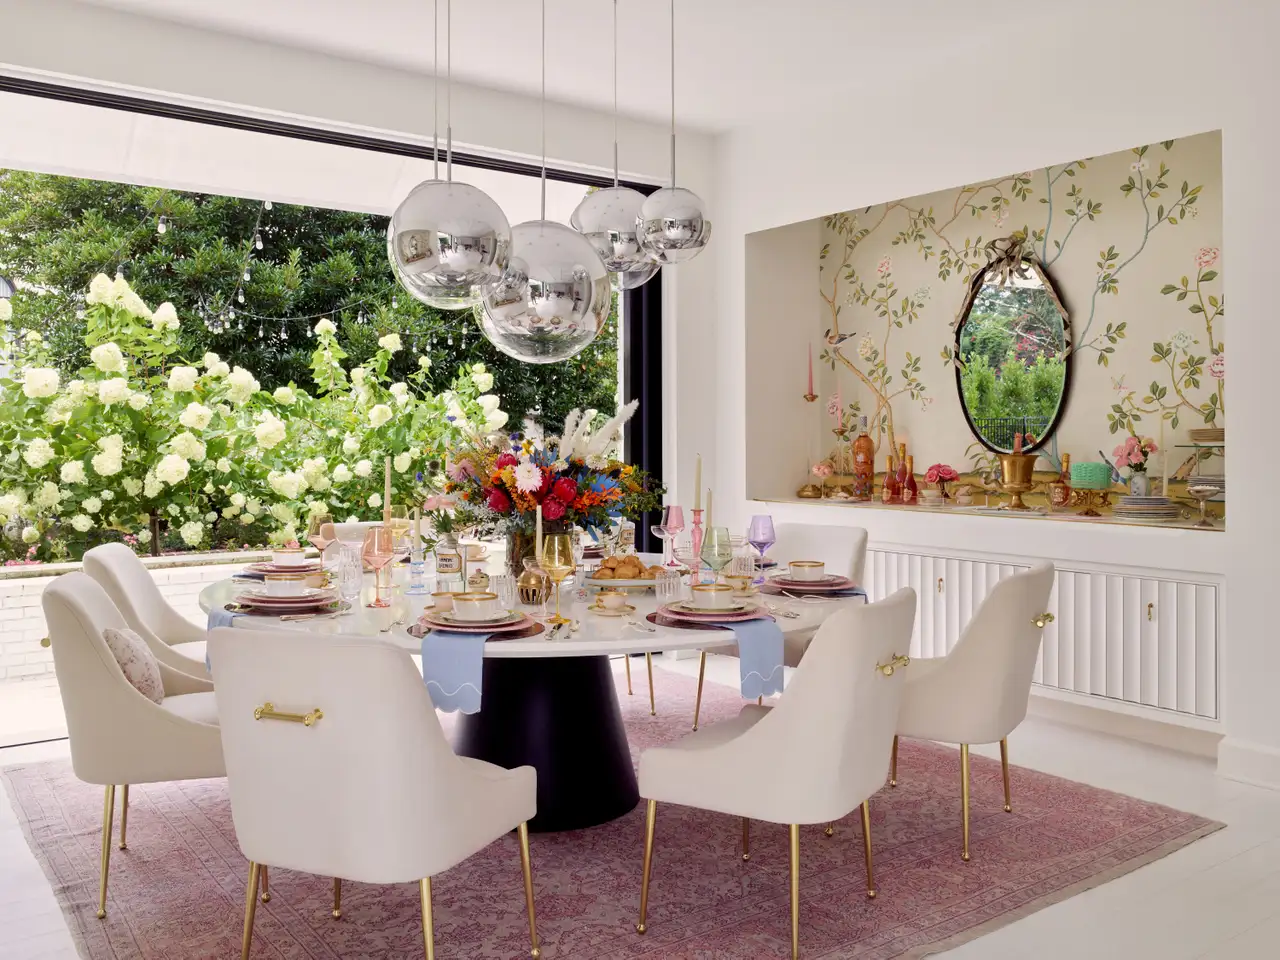 A maximalist dining room with a big silver balls suspension lamp